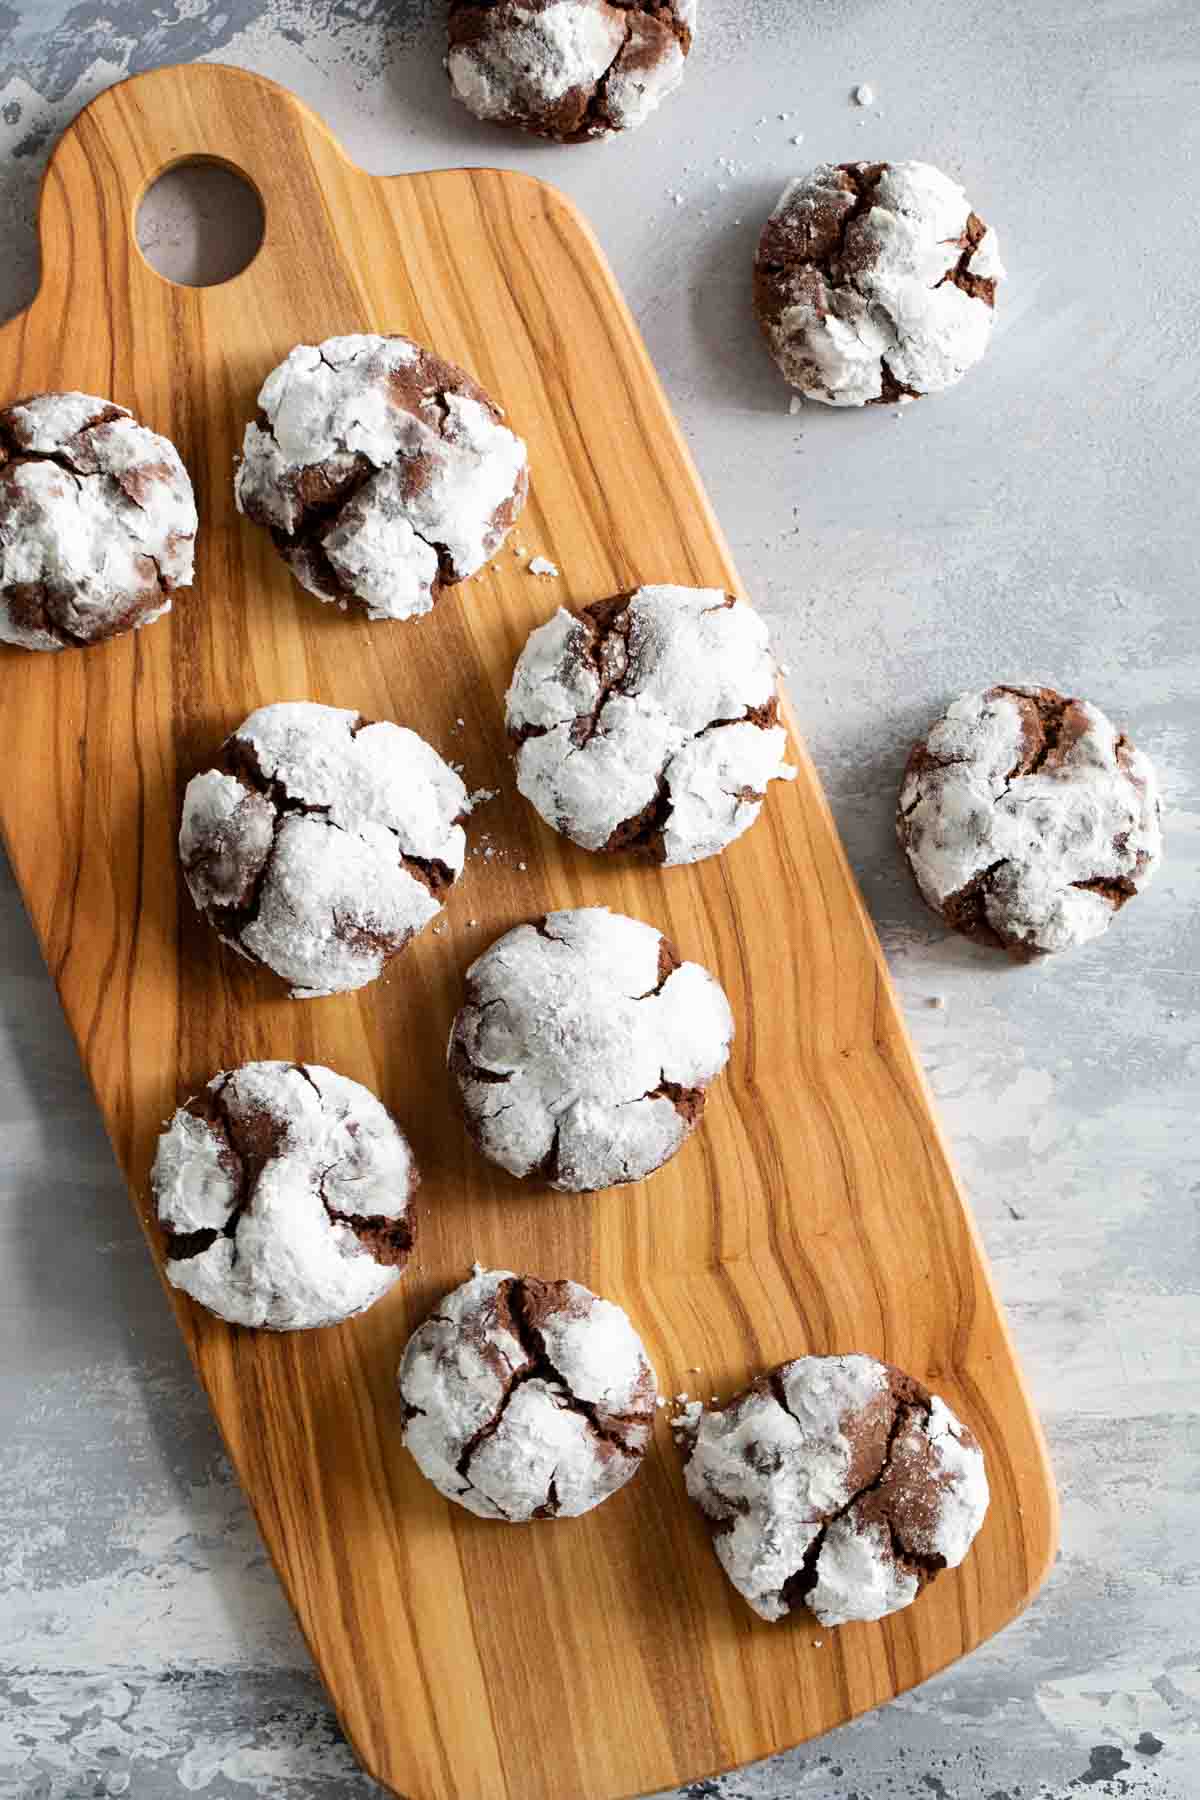 chocolate crinkle cookies dusted in powdered sugar on a wooden board.